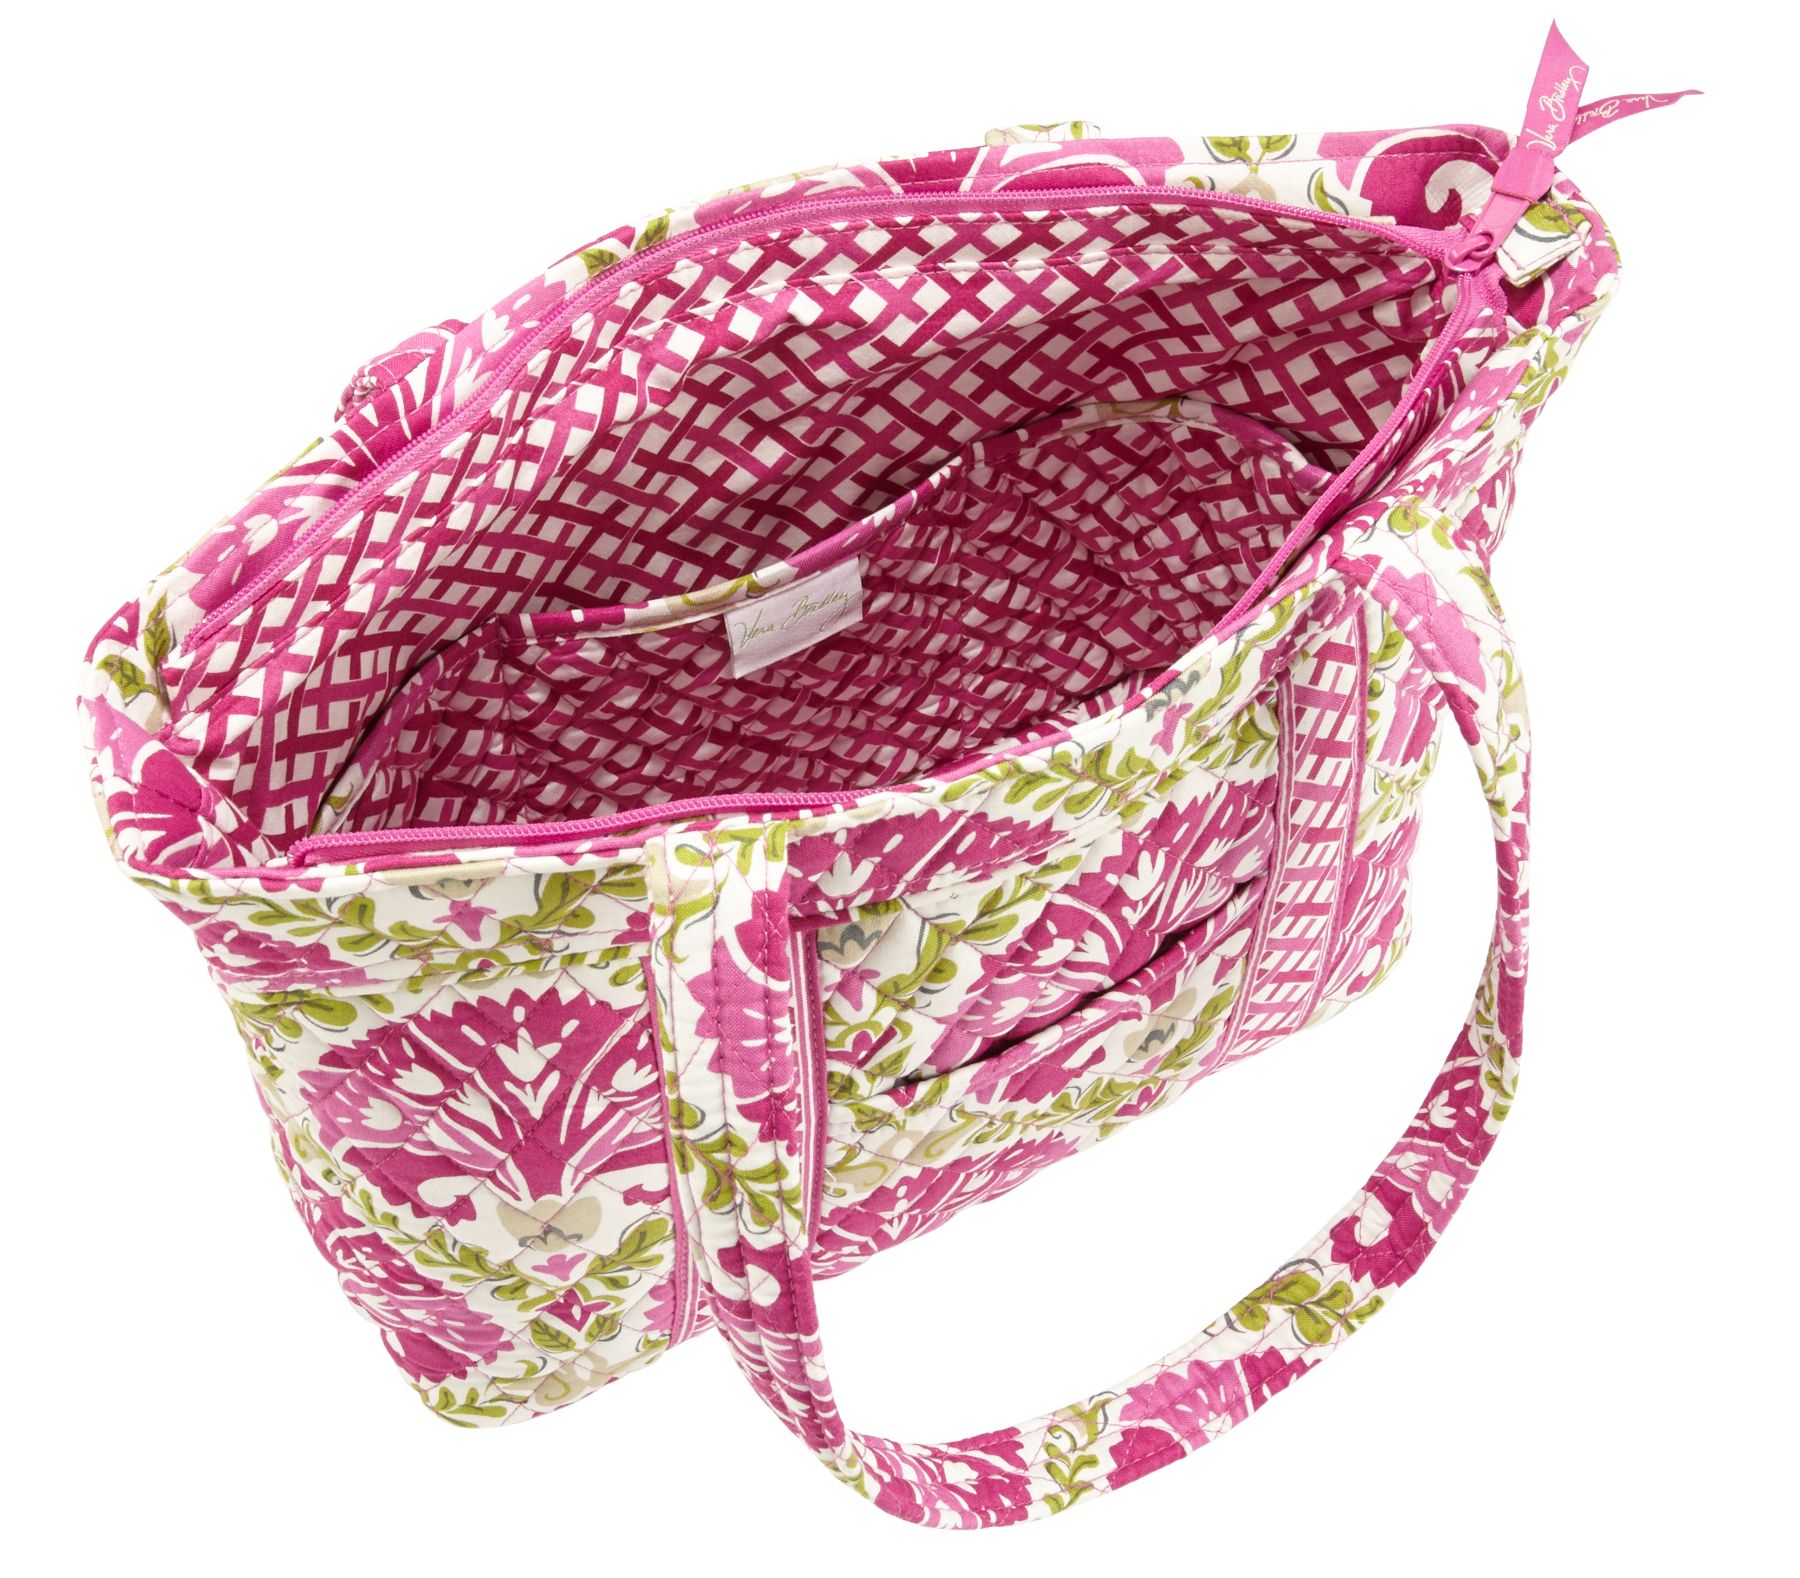 Details about NEW Vera Bradley Mandy in Julep Tulip NWT MSRP 70.00